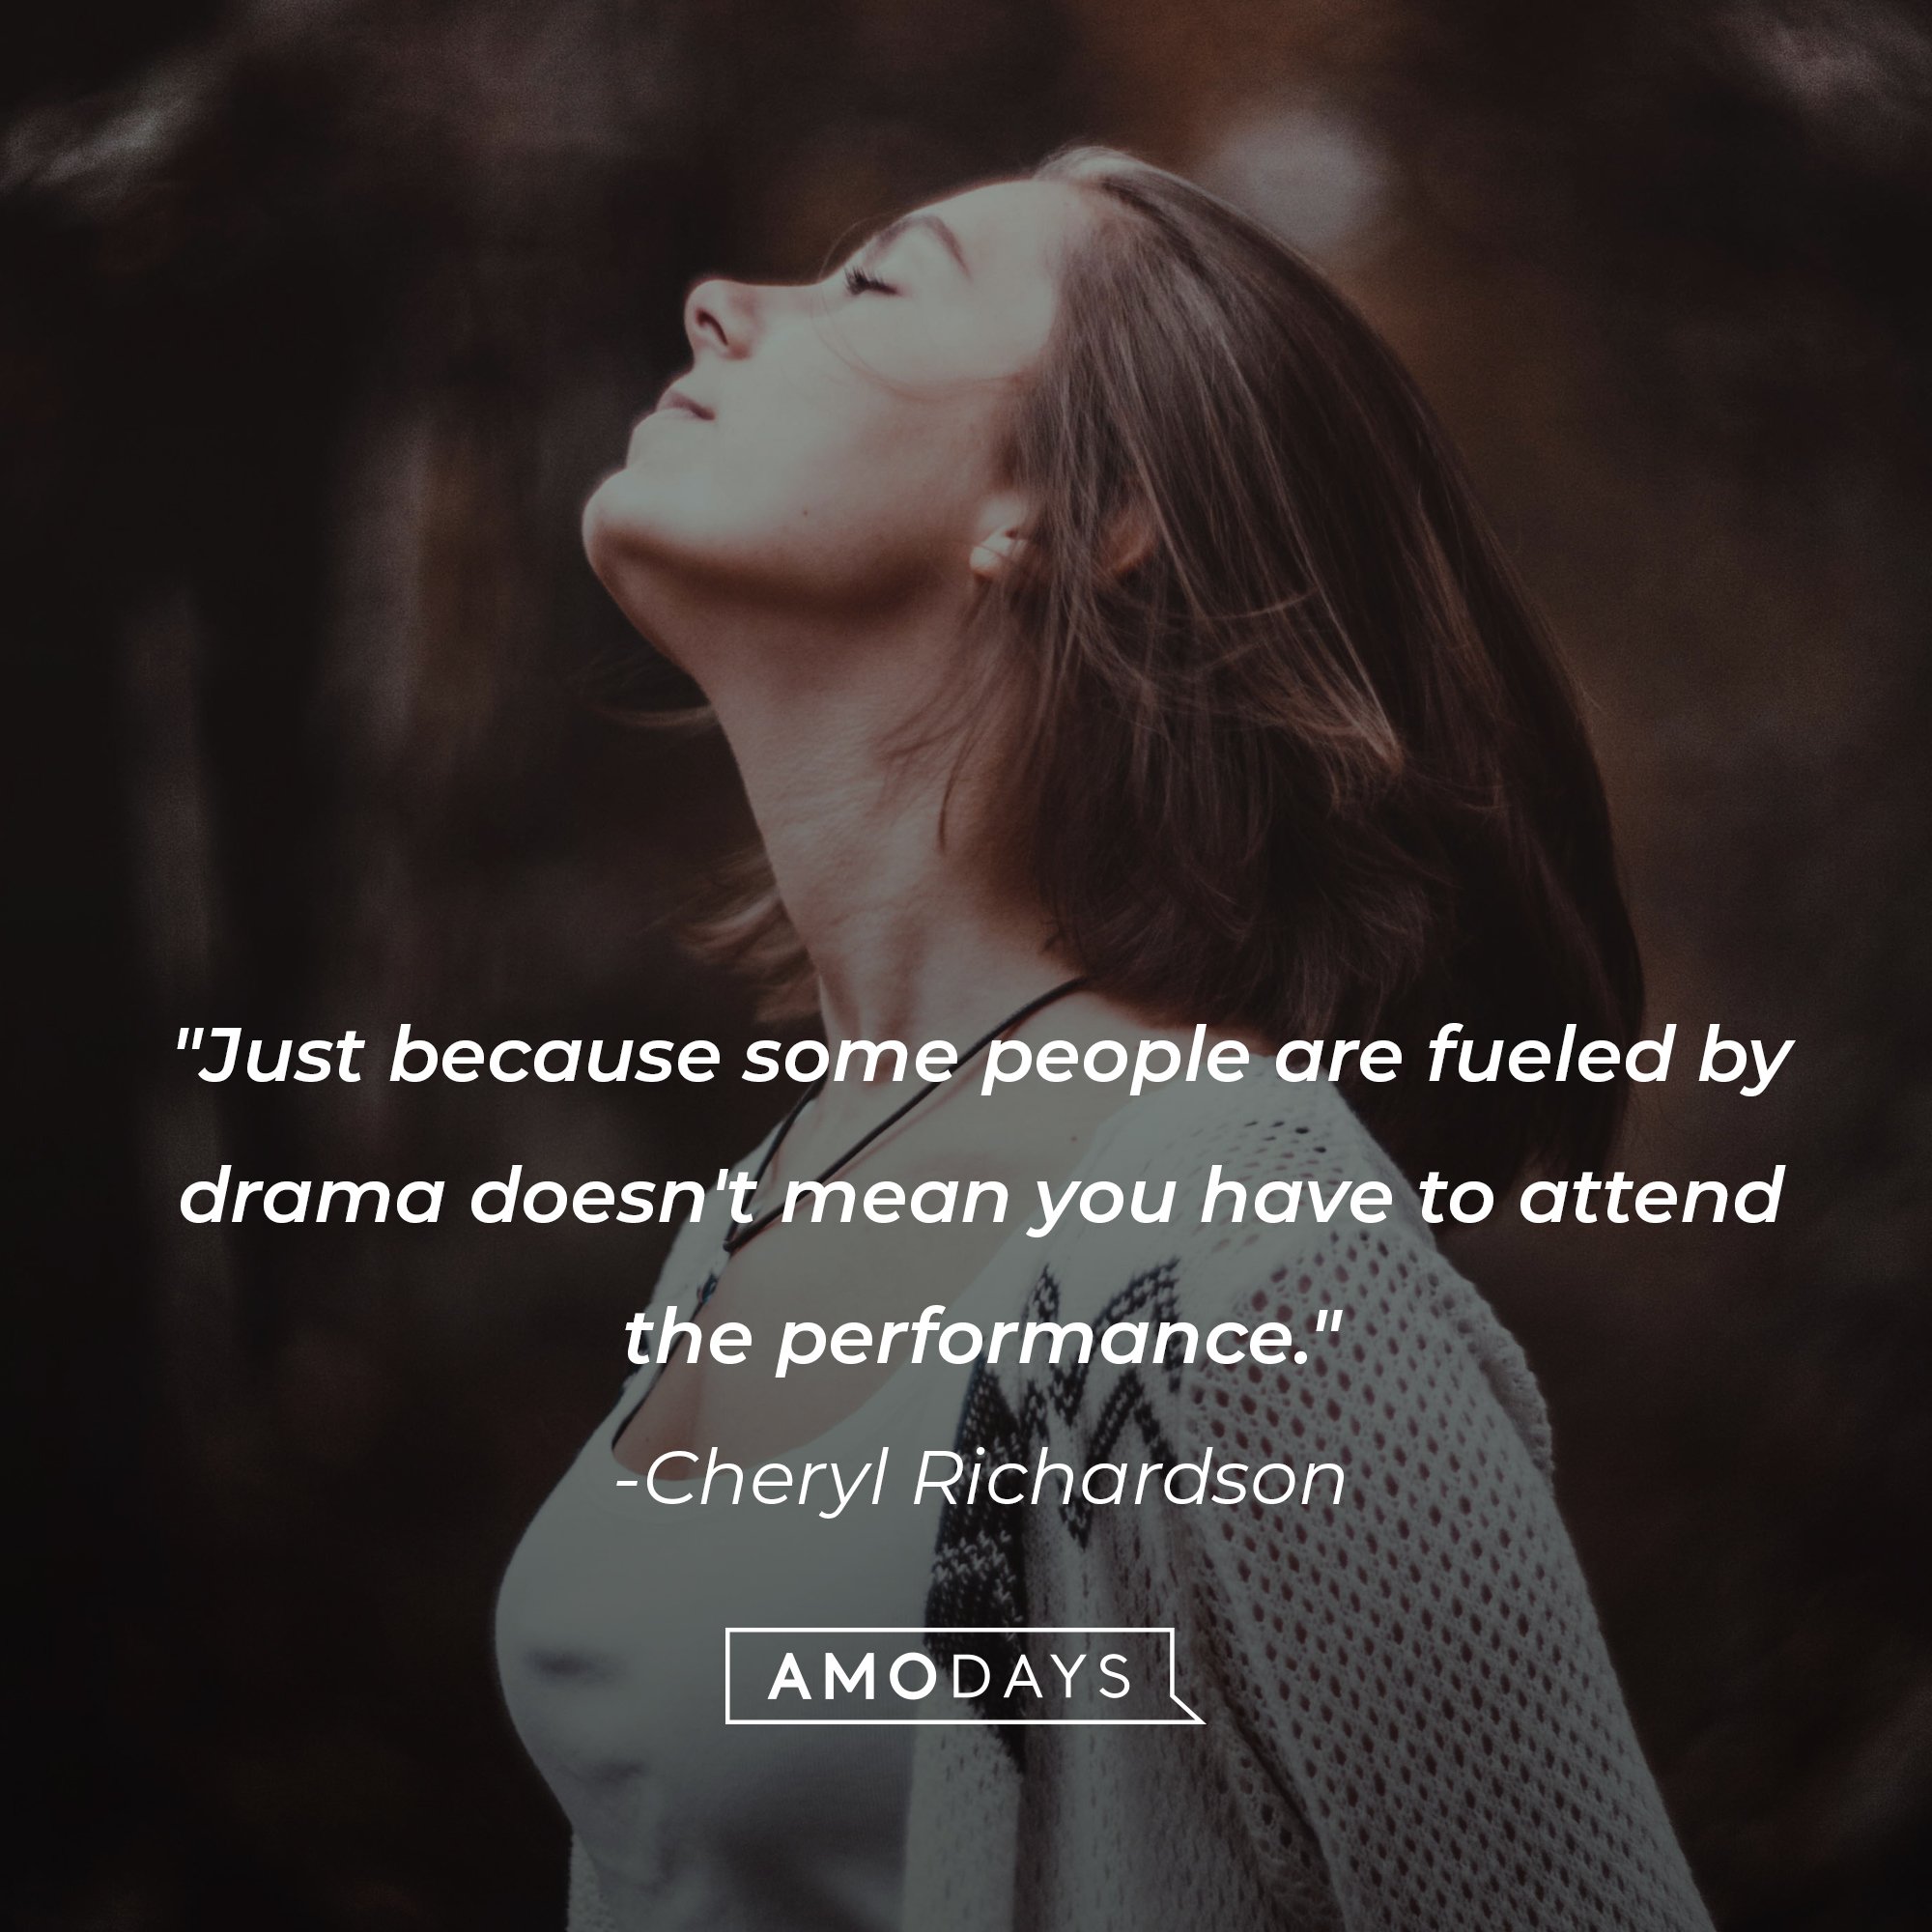 Cheryl Richardson’s quote: "Just because some people are fueled by drama doesn't mean you have to attend the performance." | Image: AmoDays